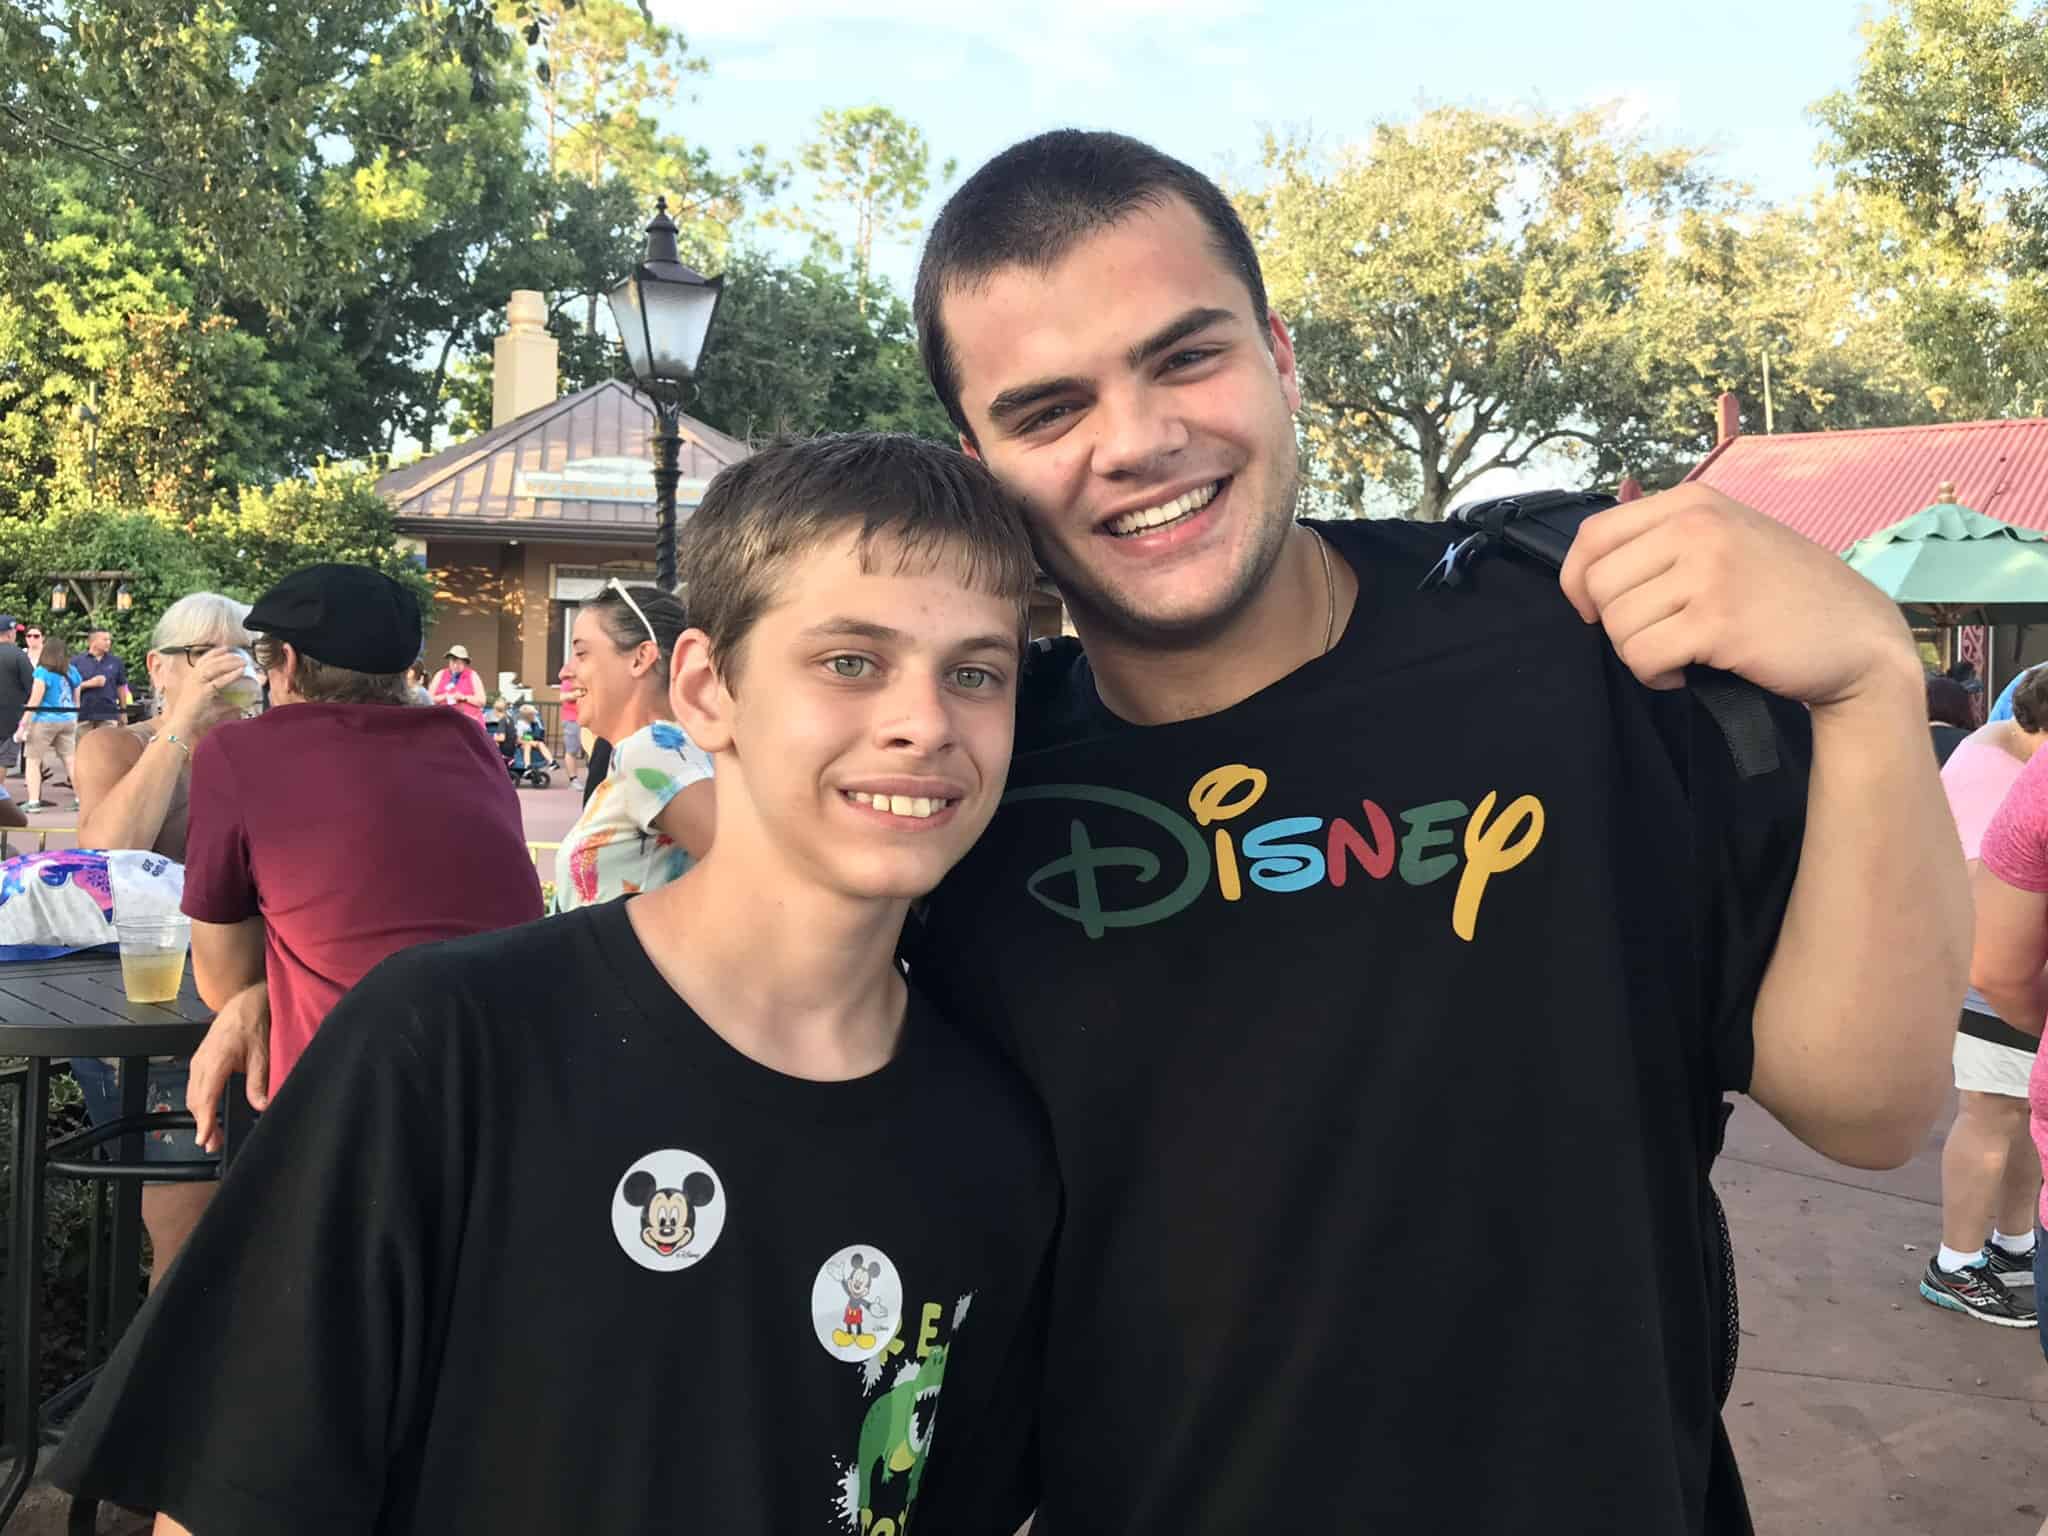 Advantages to Traveling with an autism child. People you meet